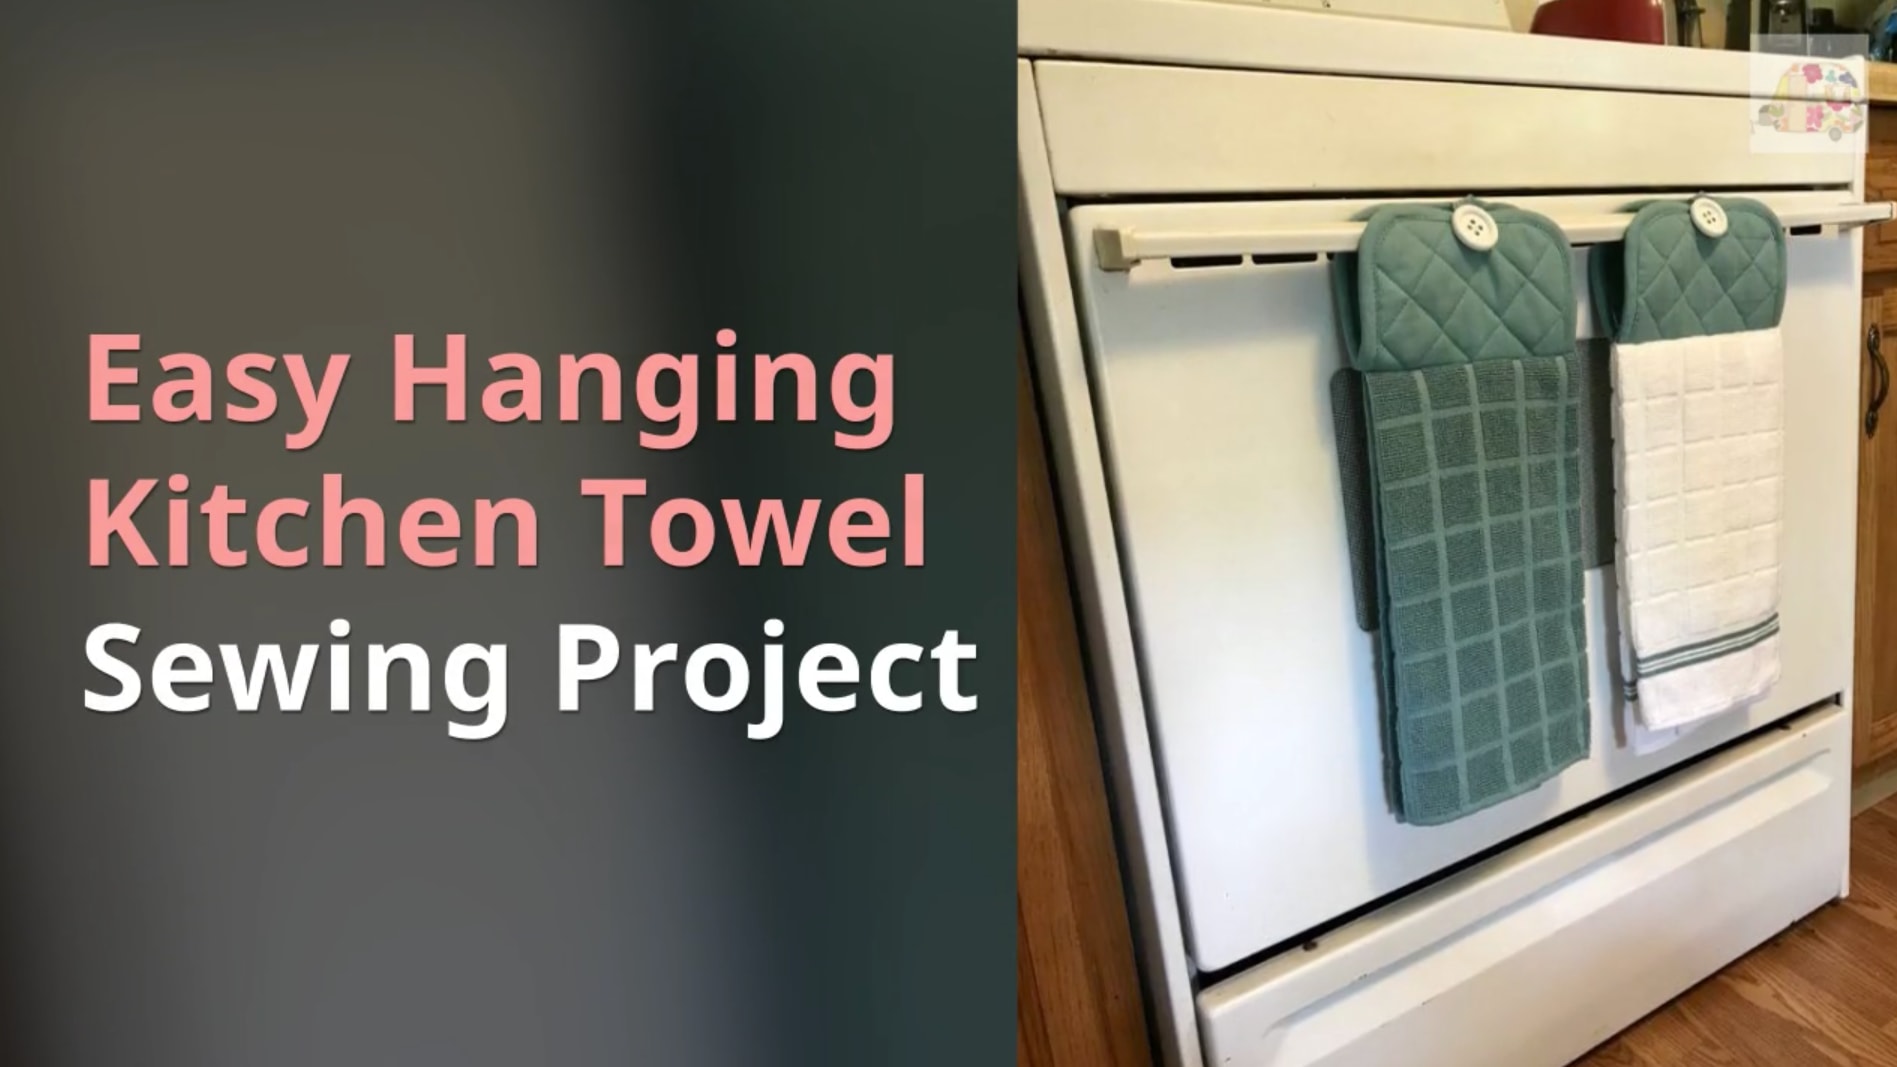 How to Make a Hanging Tea Towel Tutorial - Easy Beginner DIY Sewing Project  -Mother's Day Gift 